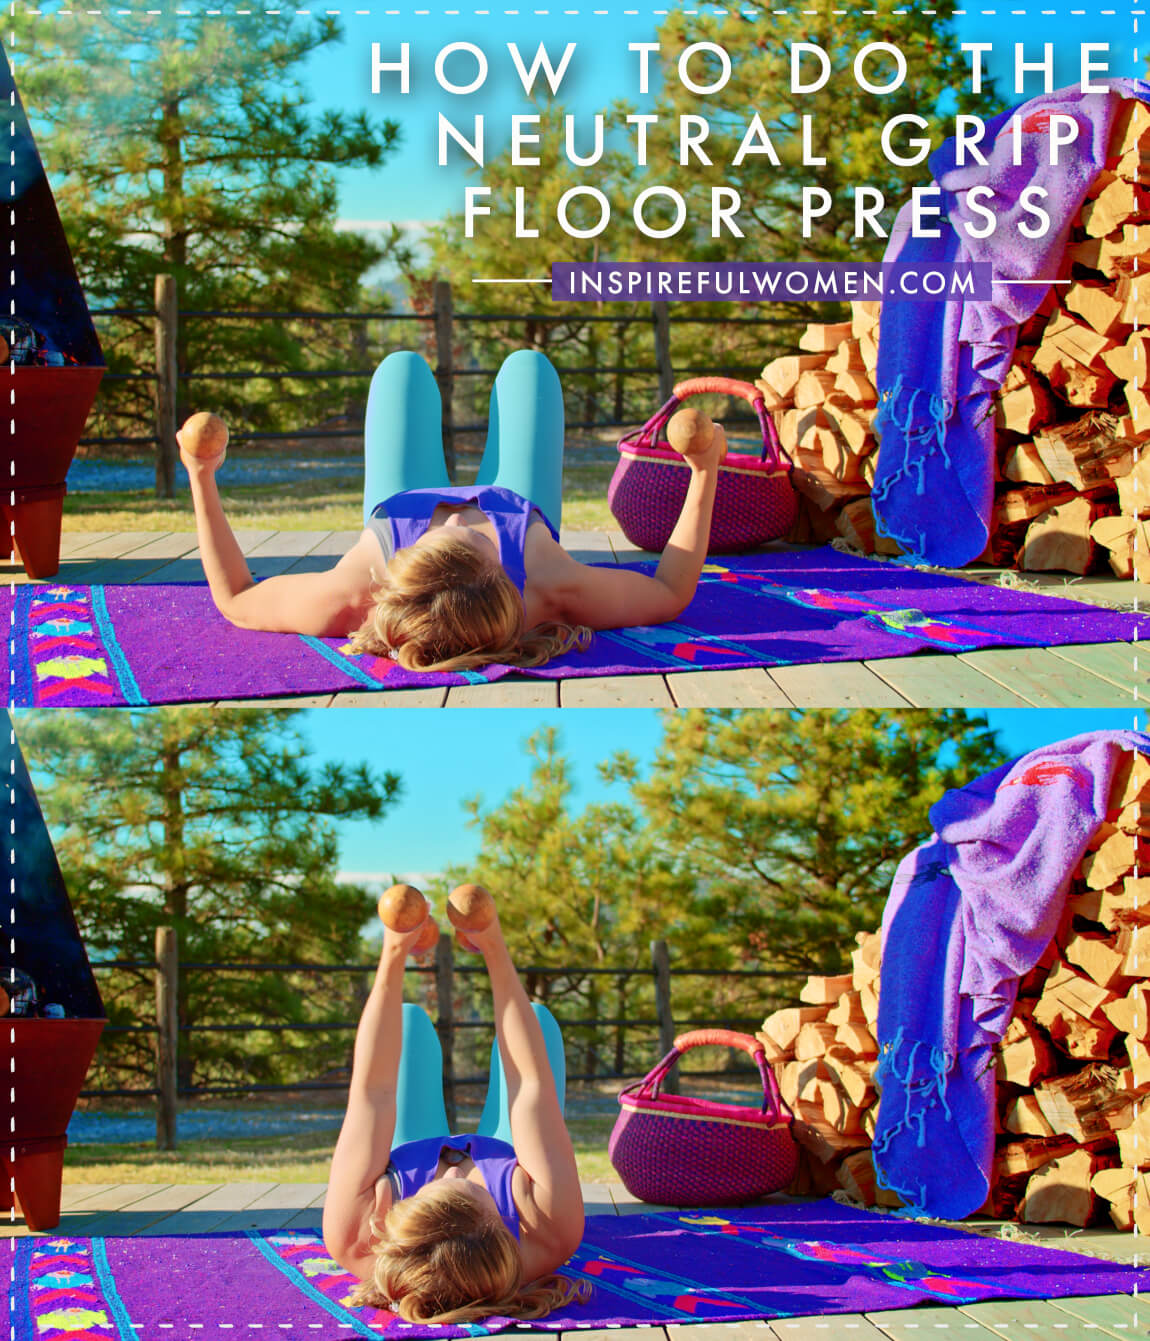 how-to-do-neutral-grip-floor-press-chest-exercise-at-home-women-40-plus